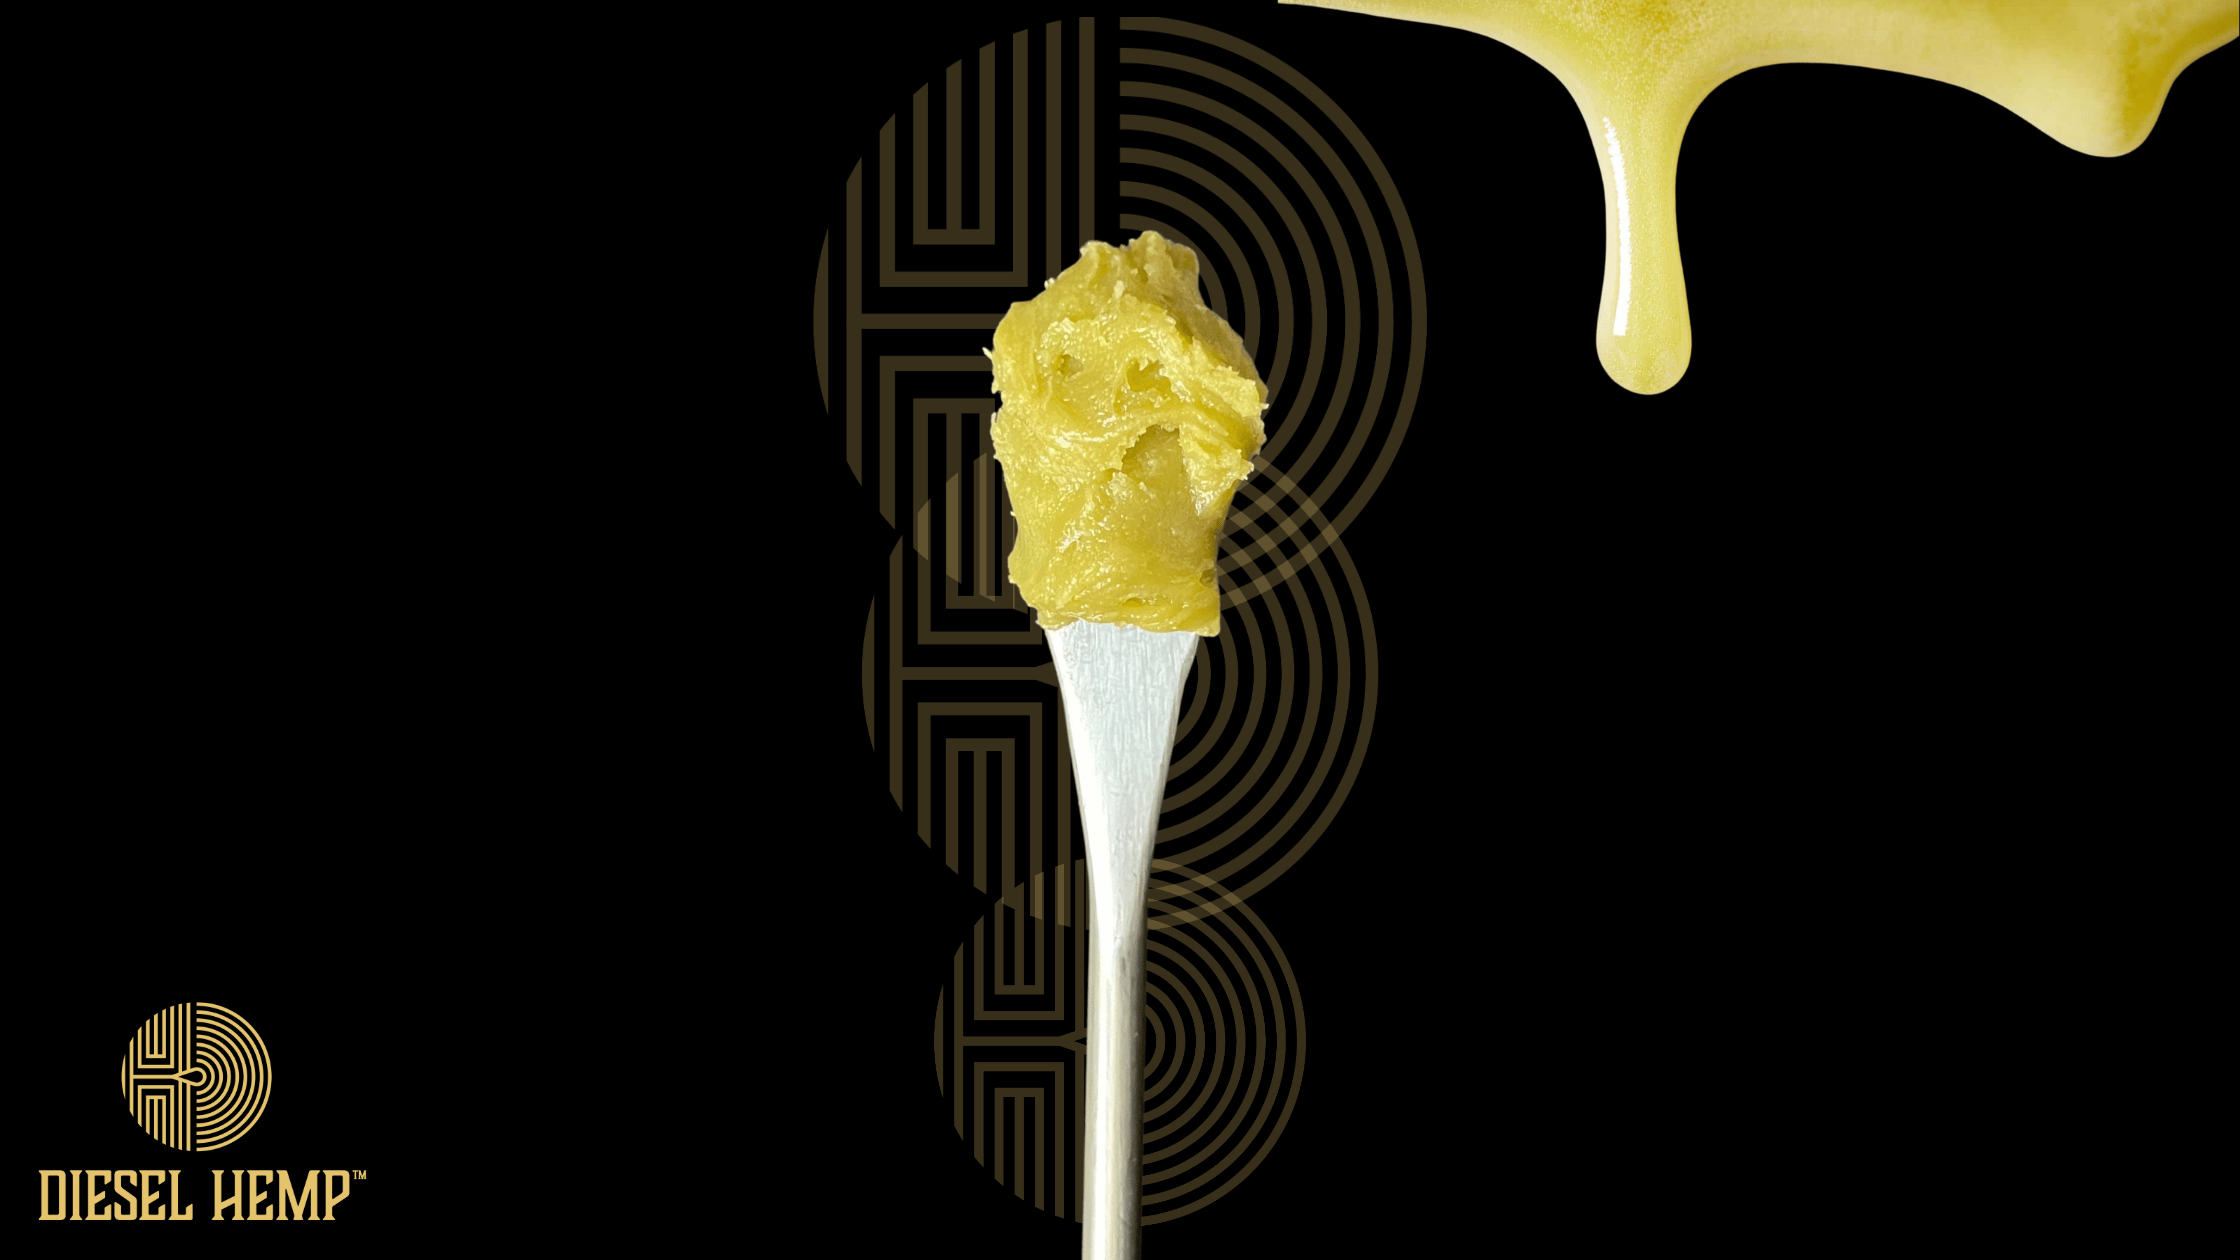 Live Rosin VS Live Resin, what is the difference?